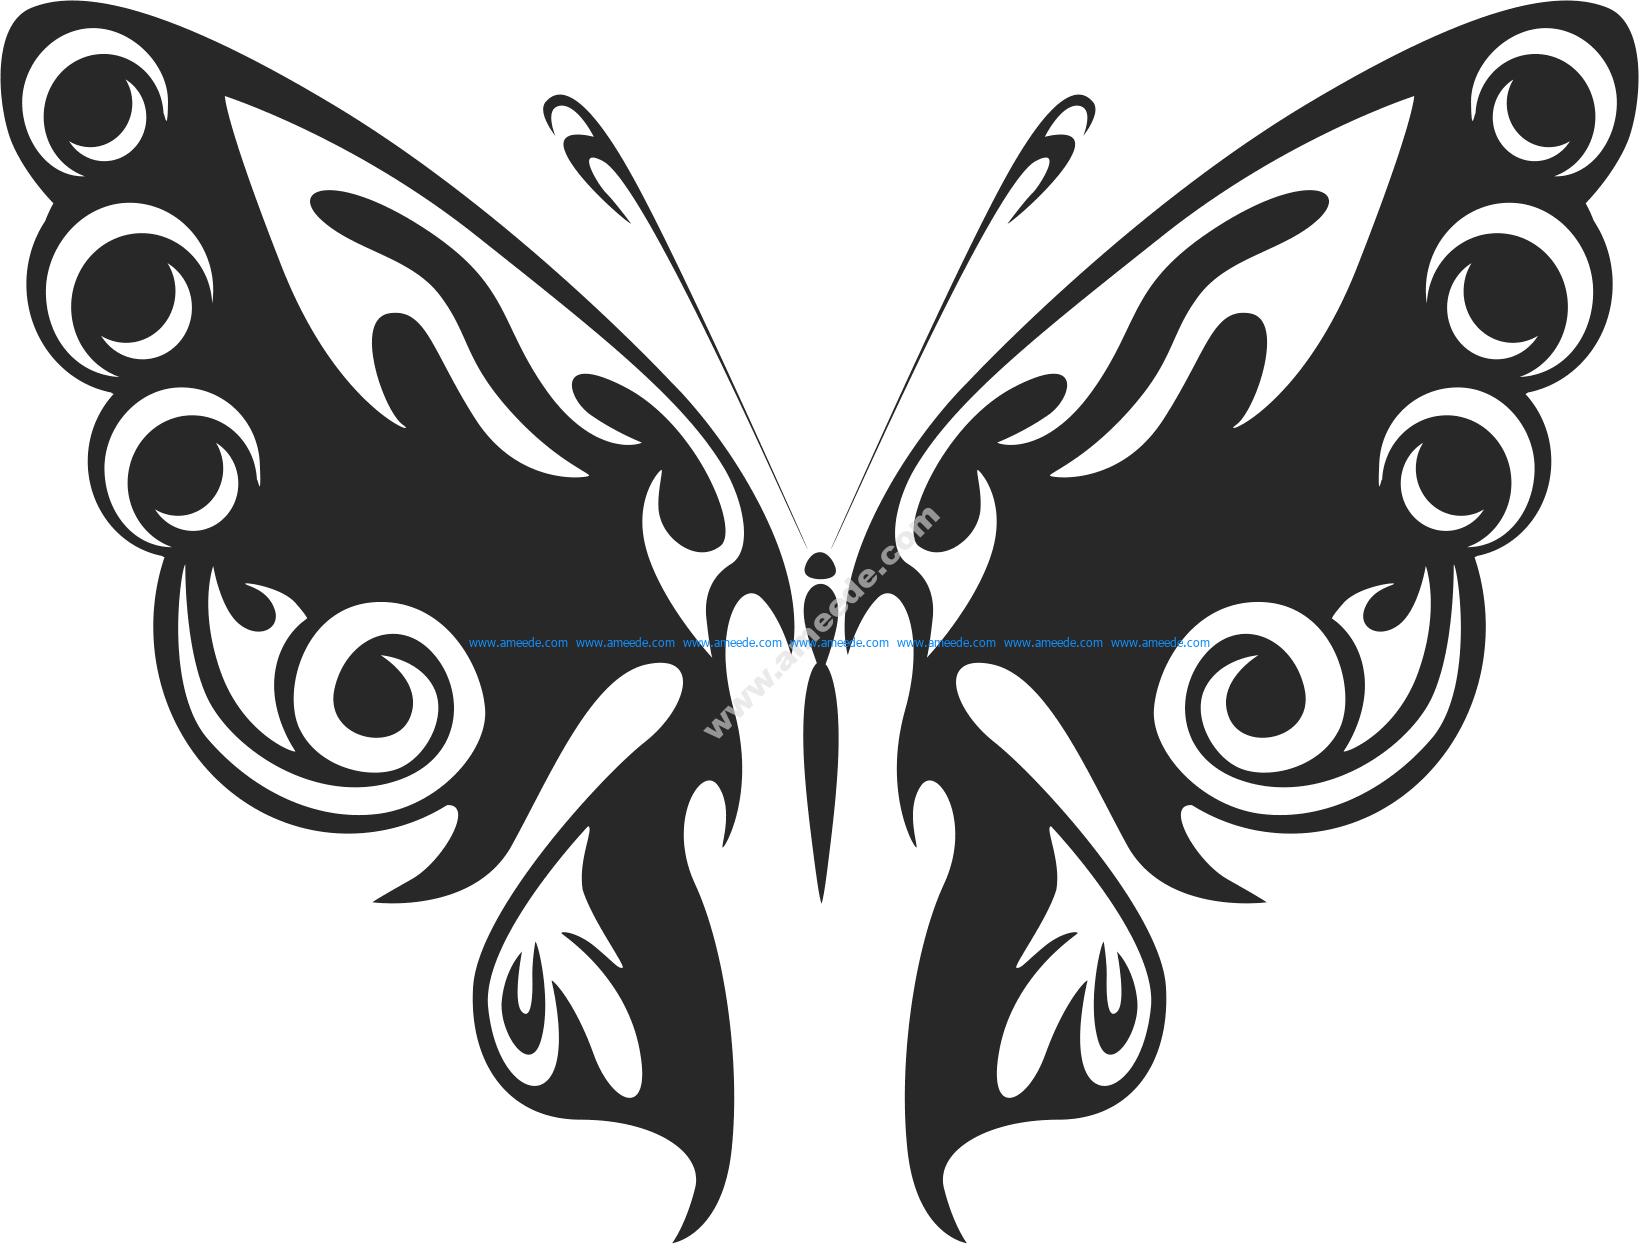 Download Tribal Butterfly Vector Art 47 - Download Free Vector